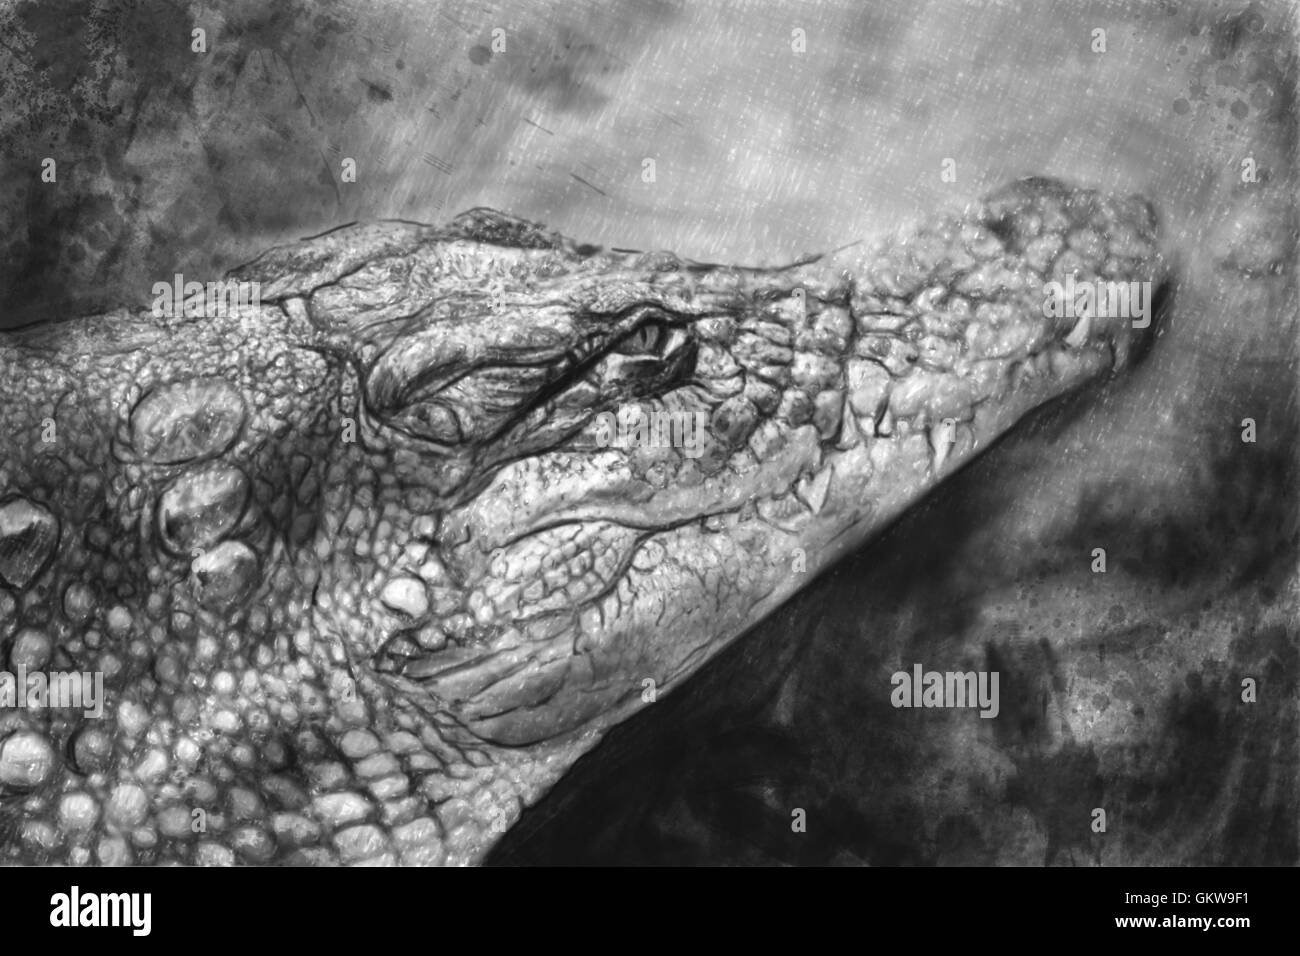 Artistic portrait of a Crocodile made with pencil Stock Photo